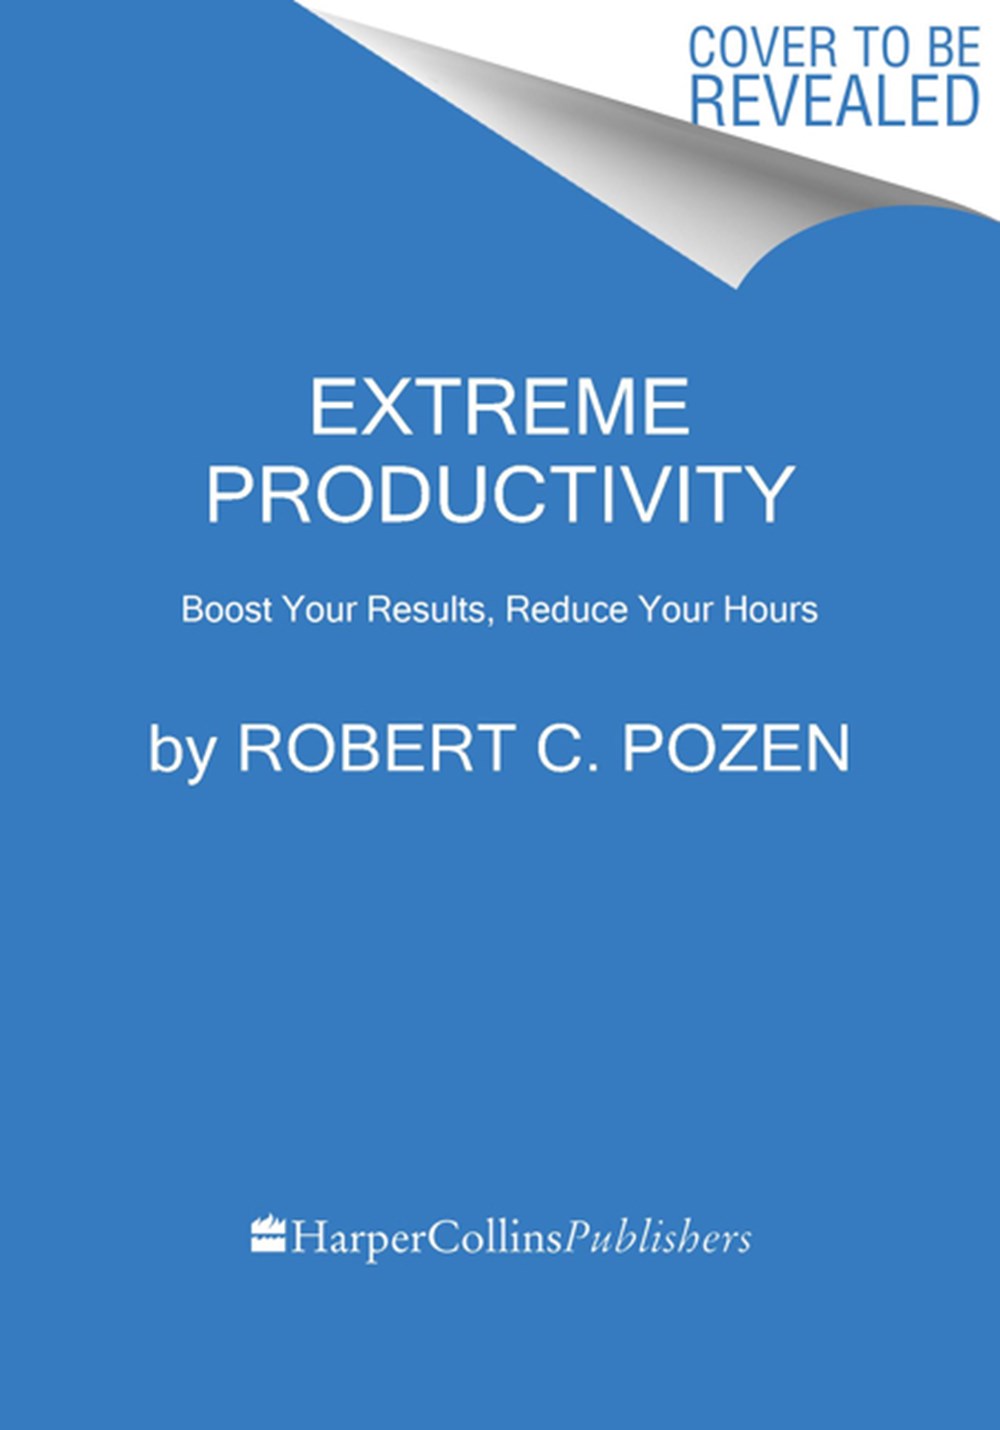 Extreme Productivity Boost Your Results, Reduce Your Hours